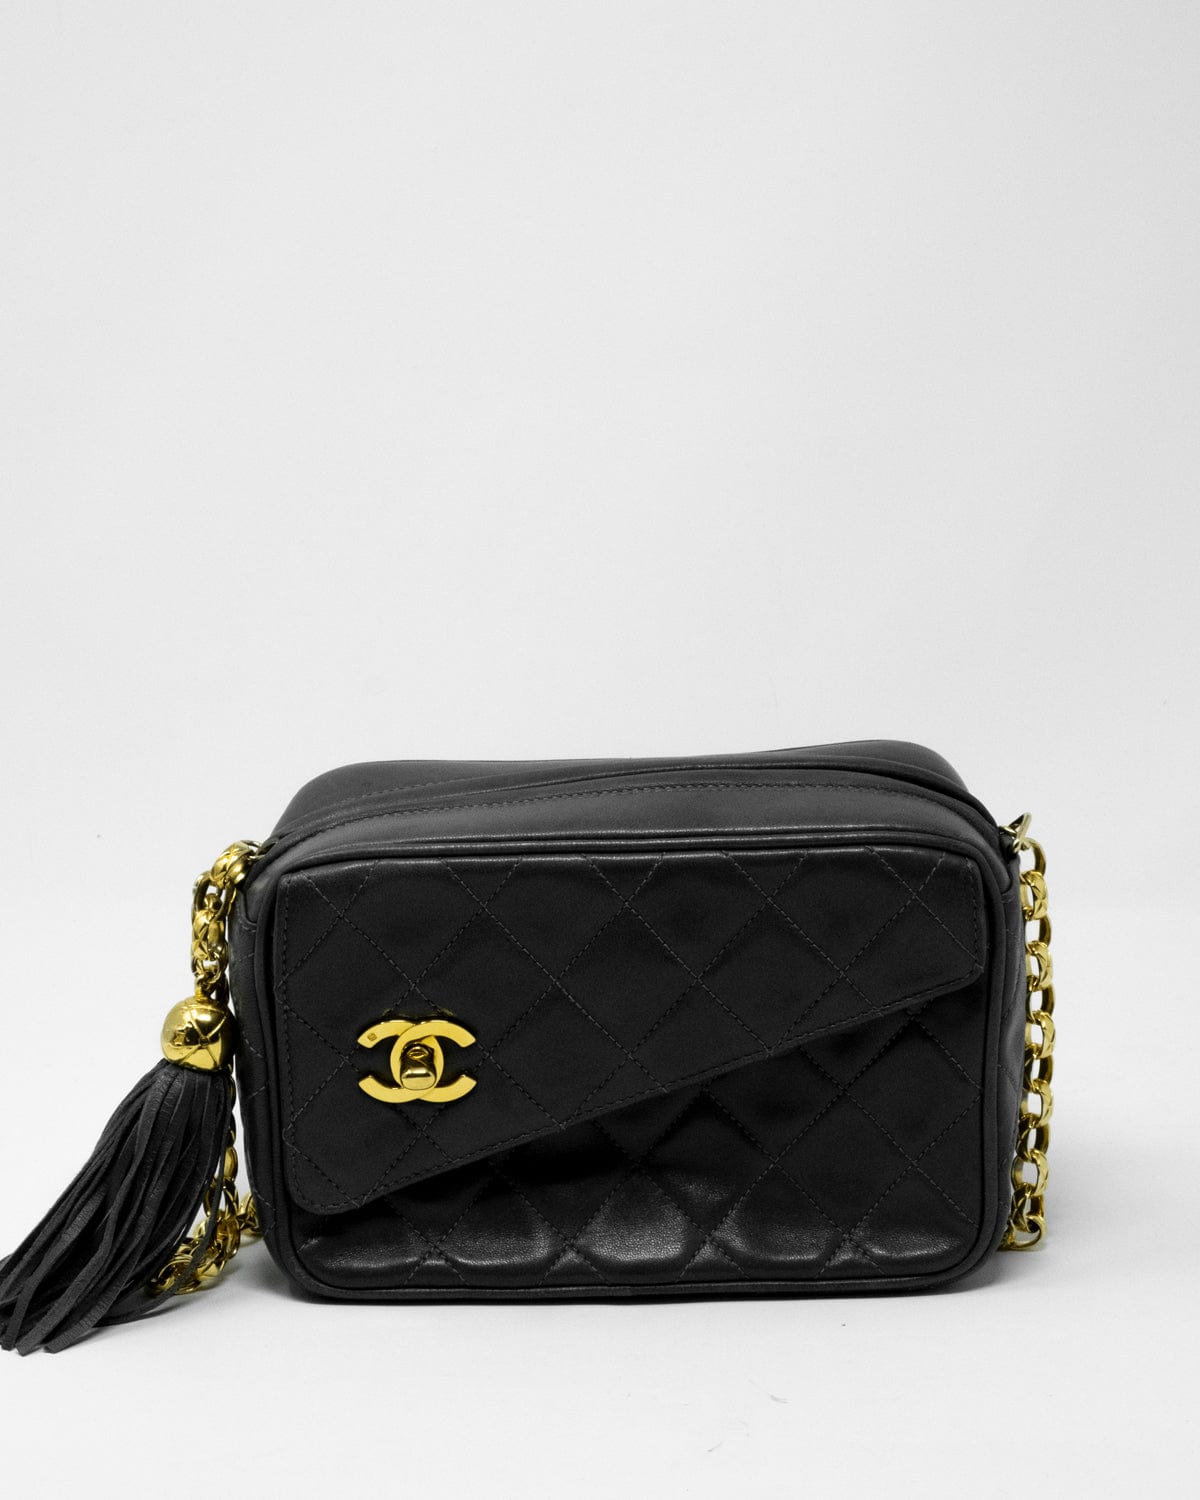 Chanel camera bag in grey lambskin leather, with bijoux chain and a ta –  LuxuryPromise